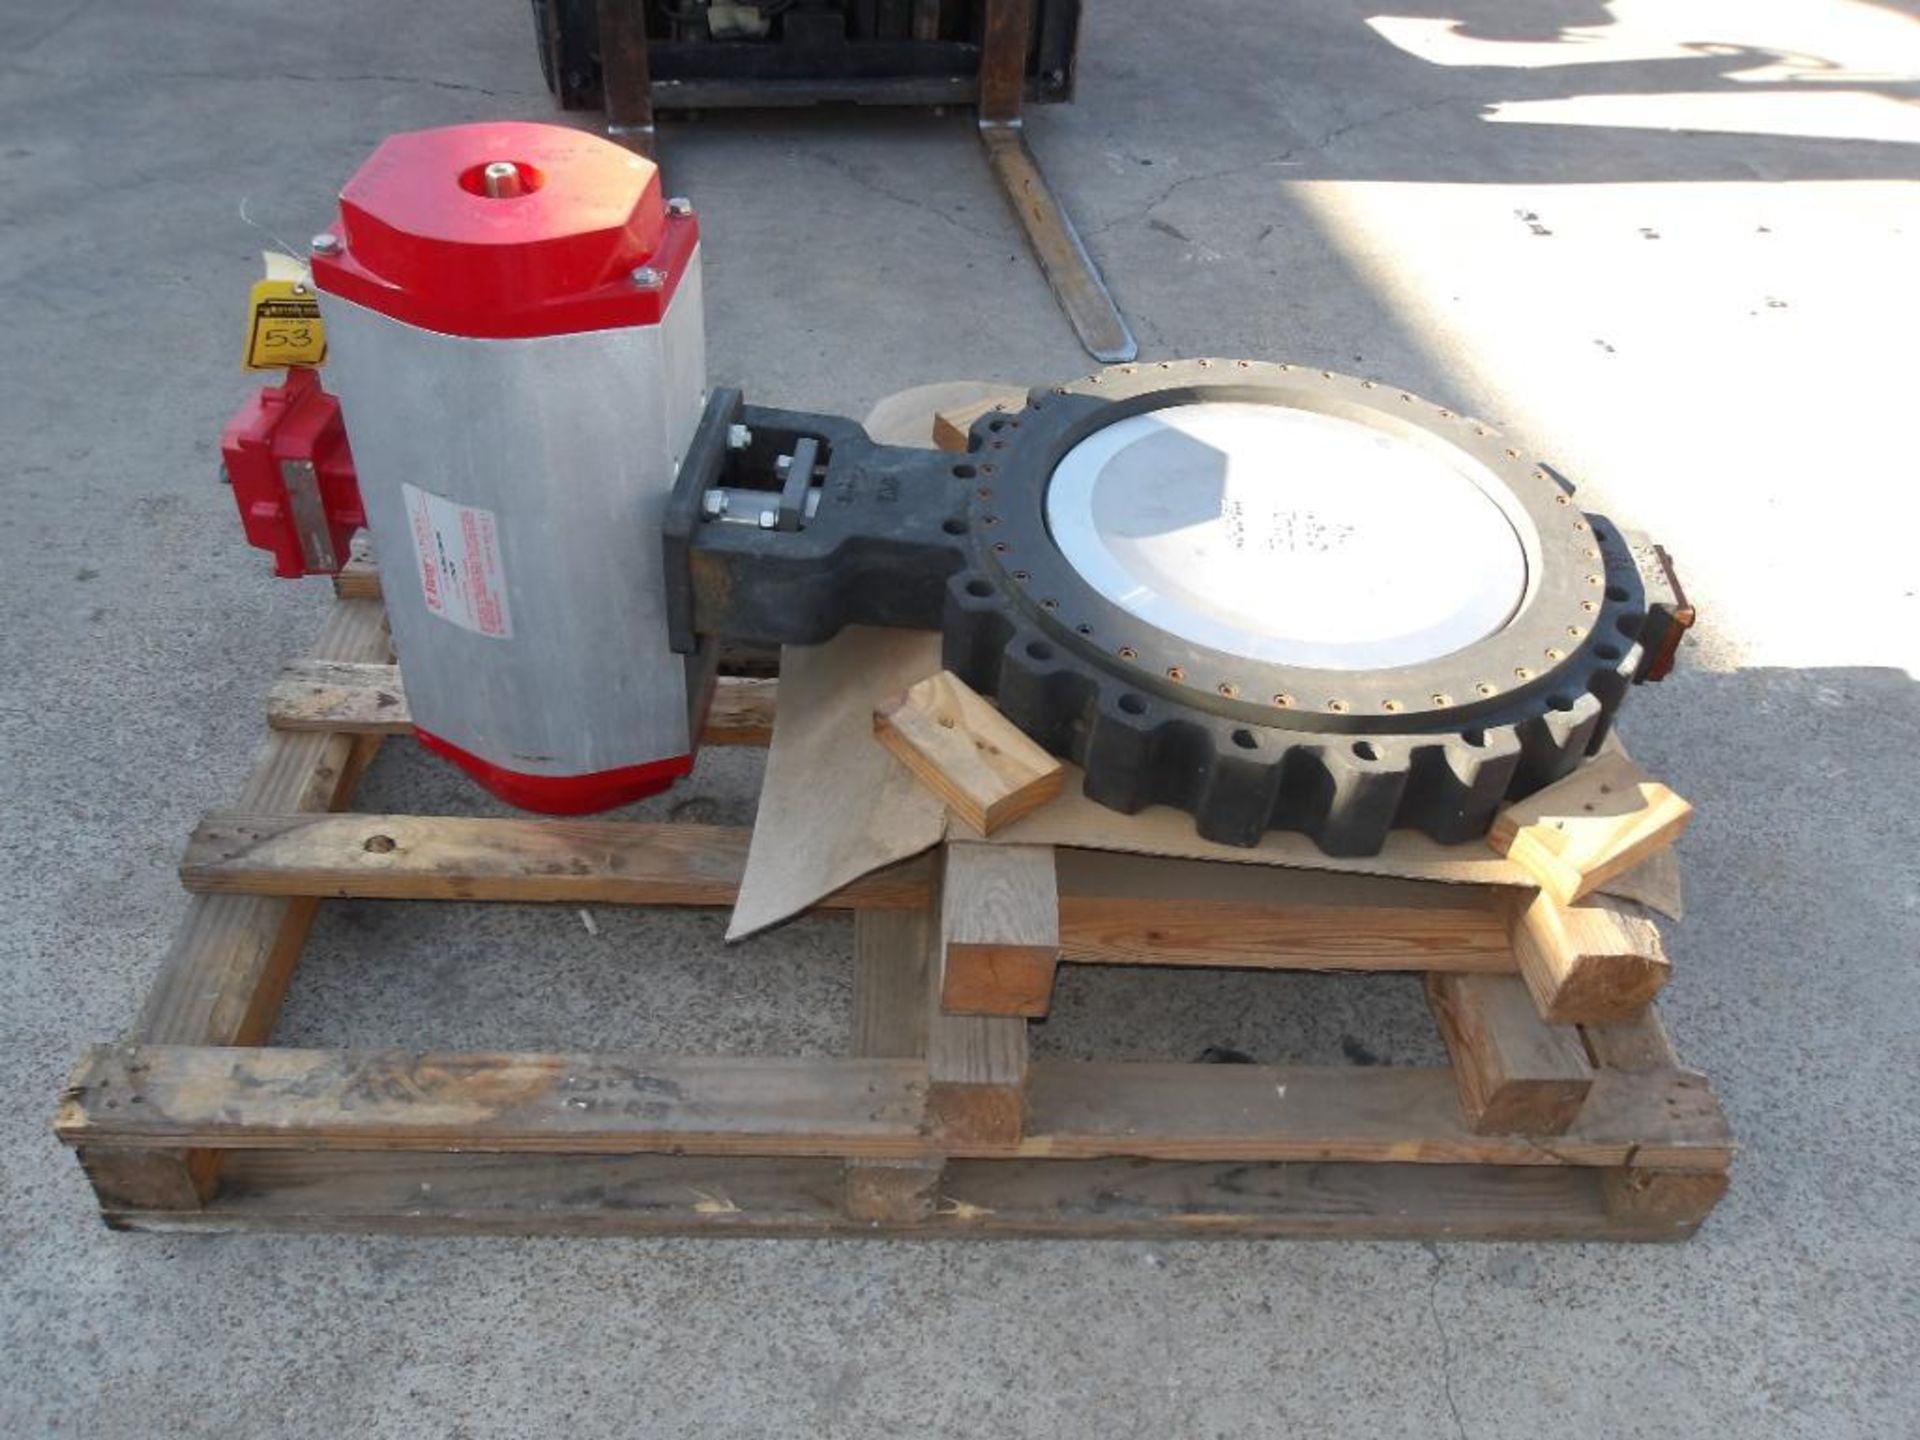 Bray 20" WCB Butterfly Valve & Actuator, Class 150#, Model 412000-11001466 (New) - Image 2 of 4